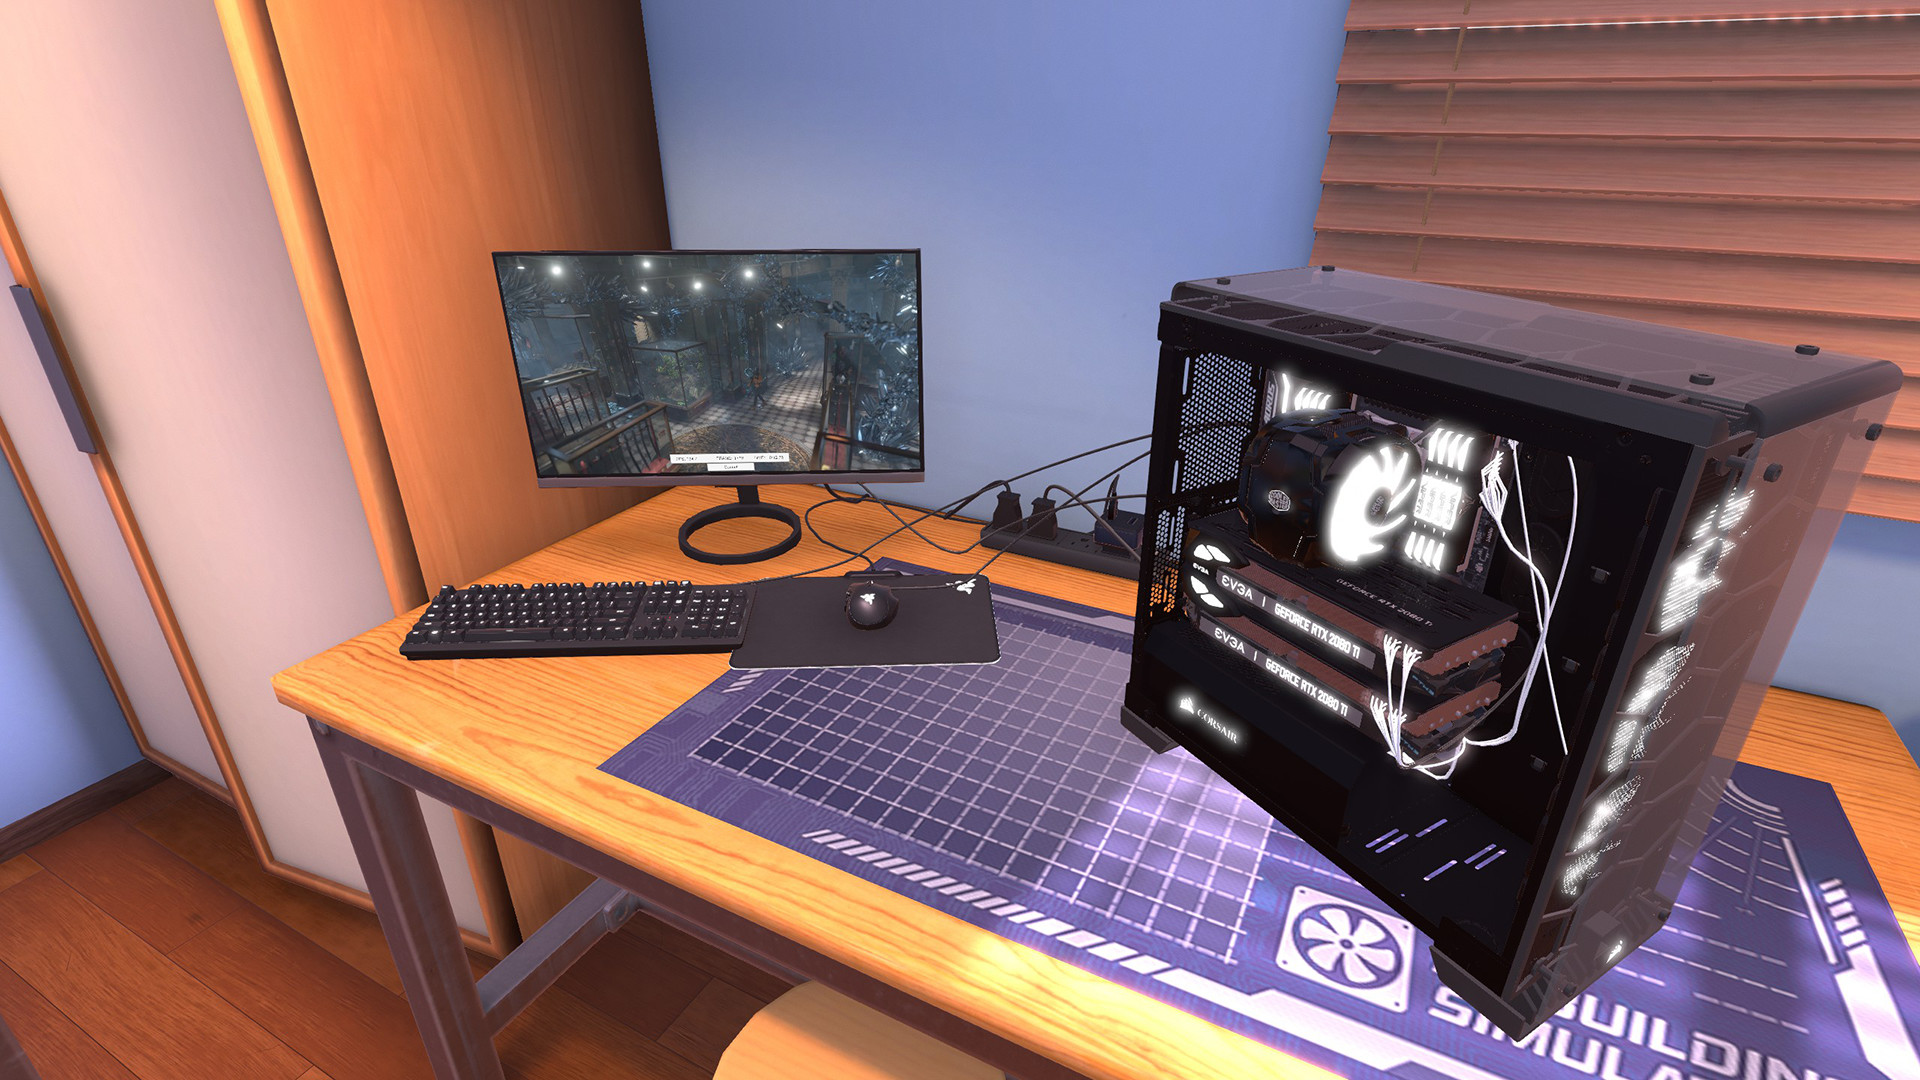 PC Building Simulator Free Download for PC